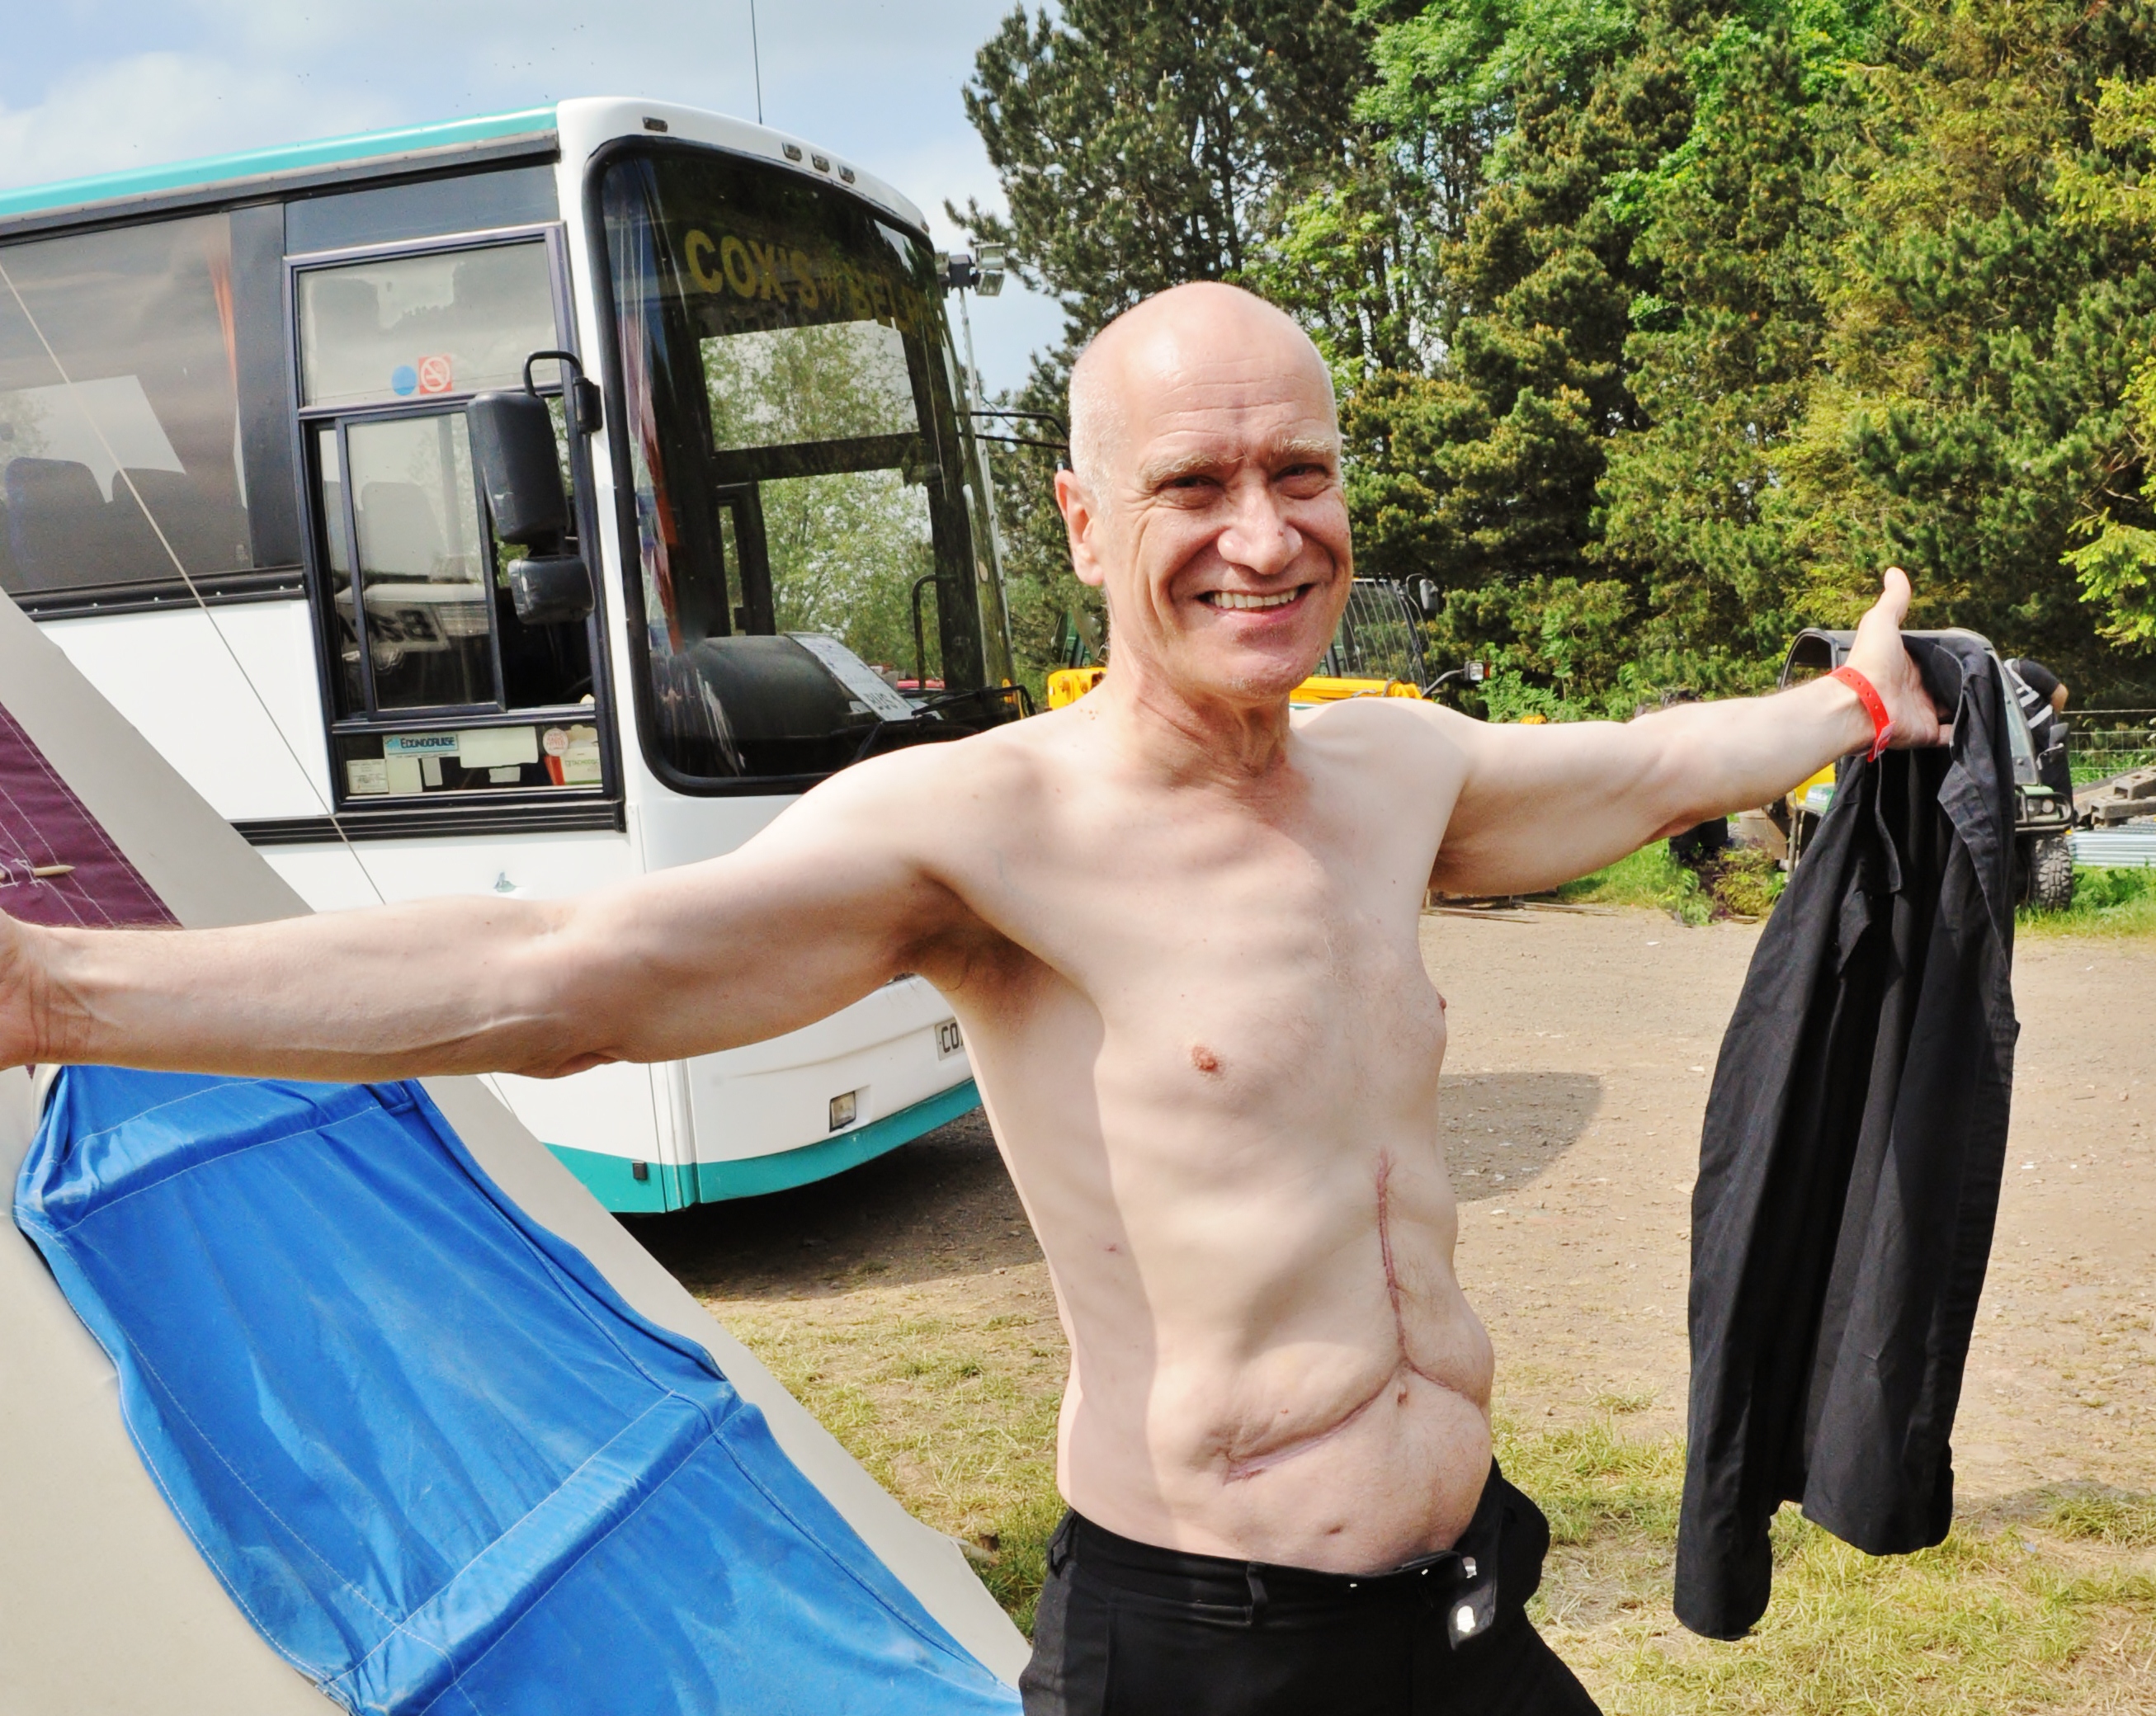 Cancer survivor Wilko Johnson and the "Mercedes" scar from his life-saving surgery - backstage at Bearded Theory Festival (Copyright Simon Redley)